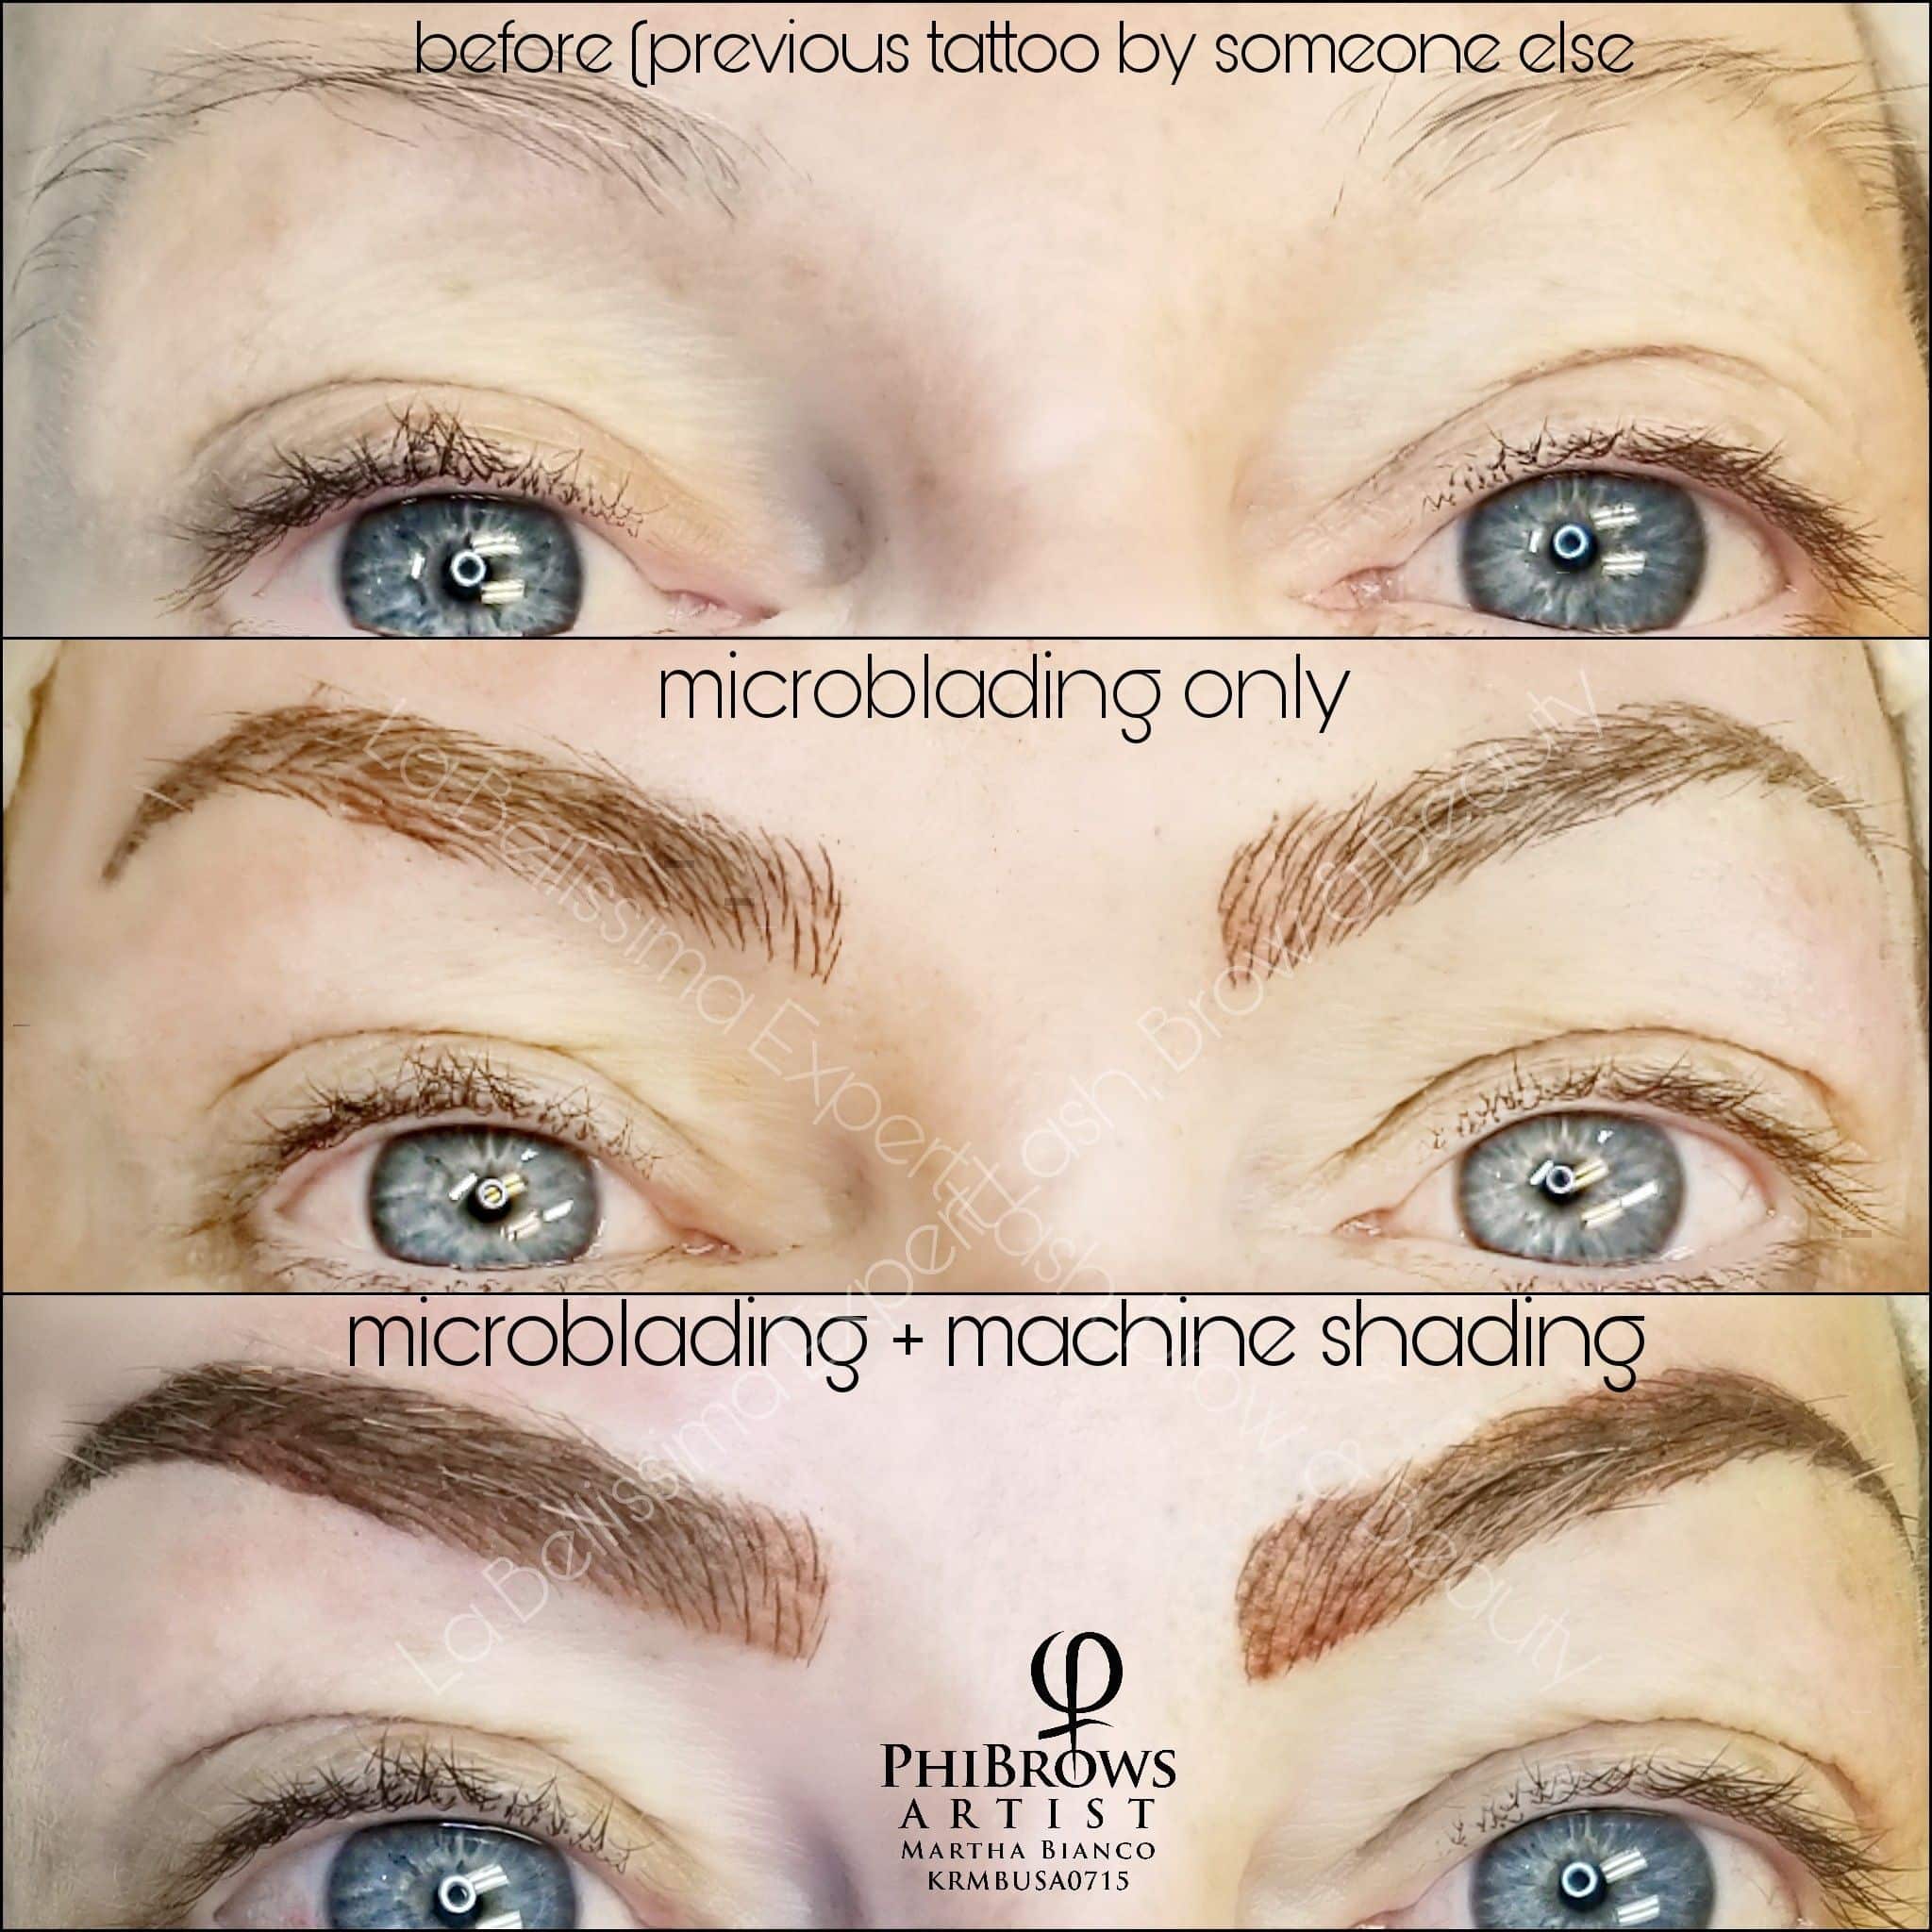 Difference Between Tattoo And Microblading Eyebrows